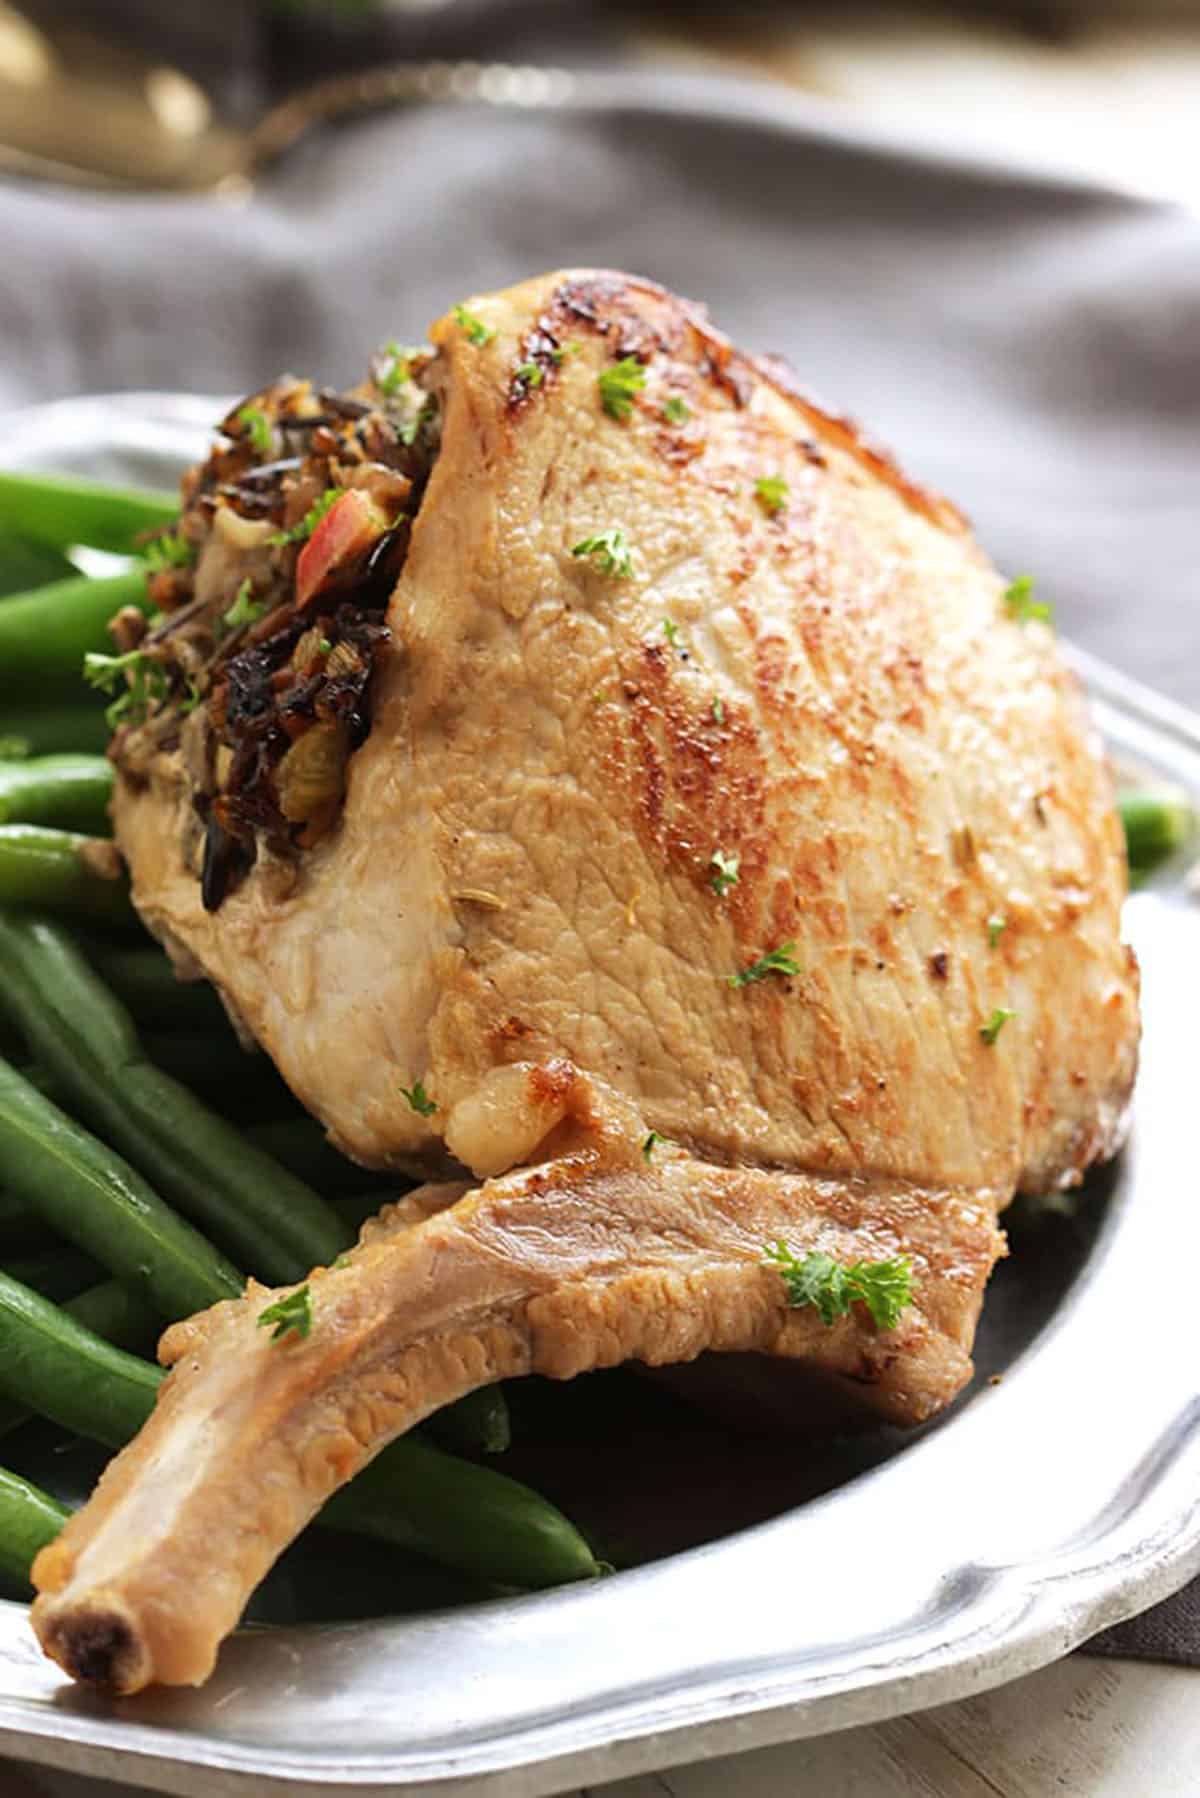 Stuffed Pork Chop with wild rice on top of a plate of green beans.